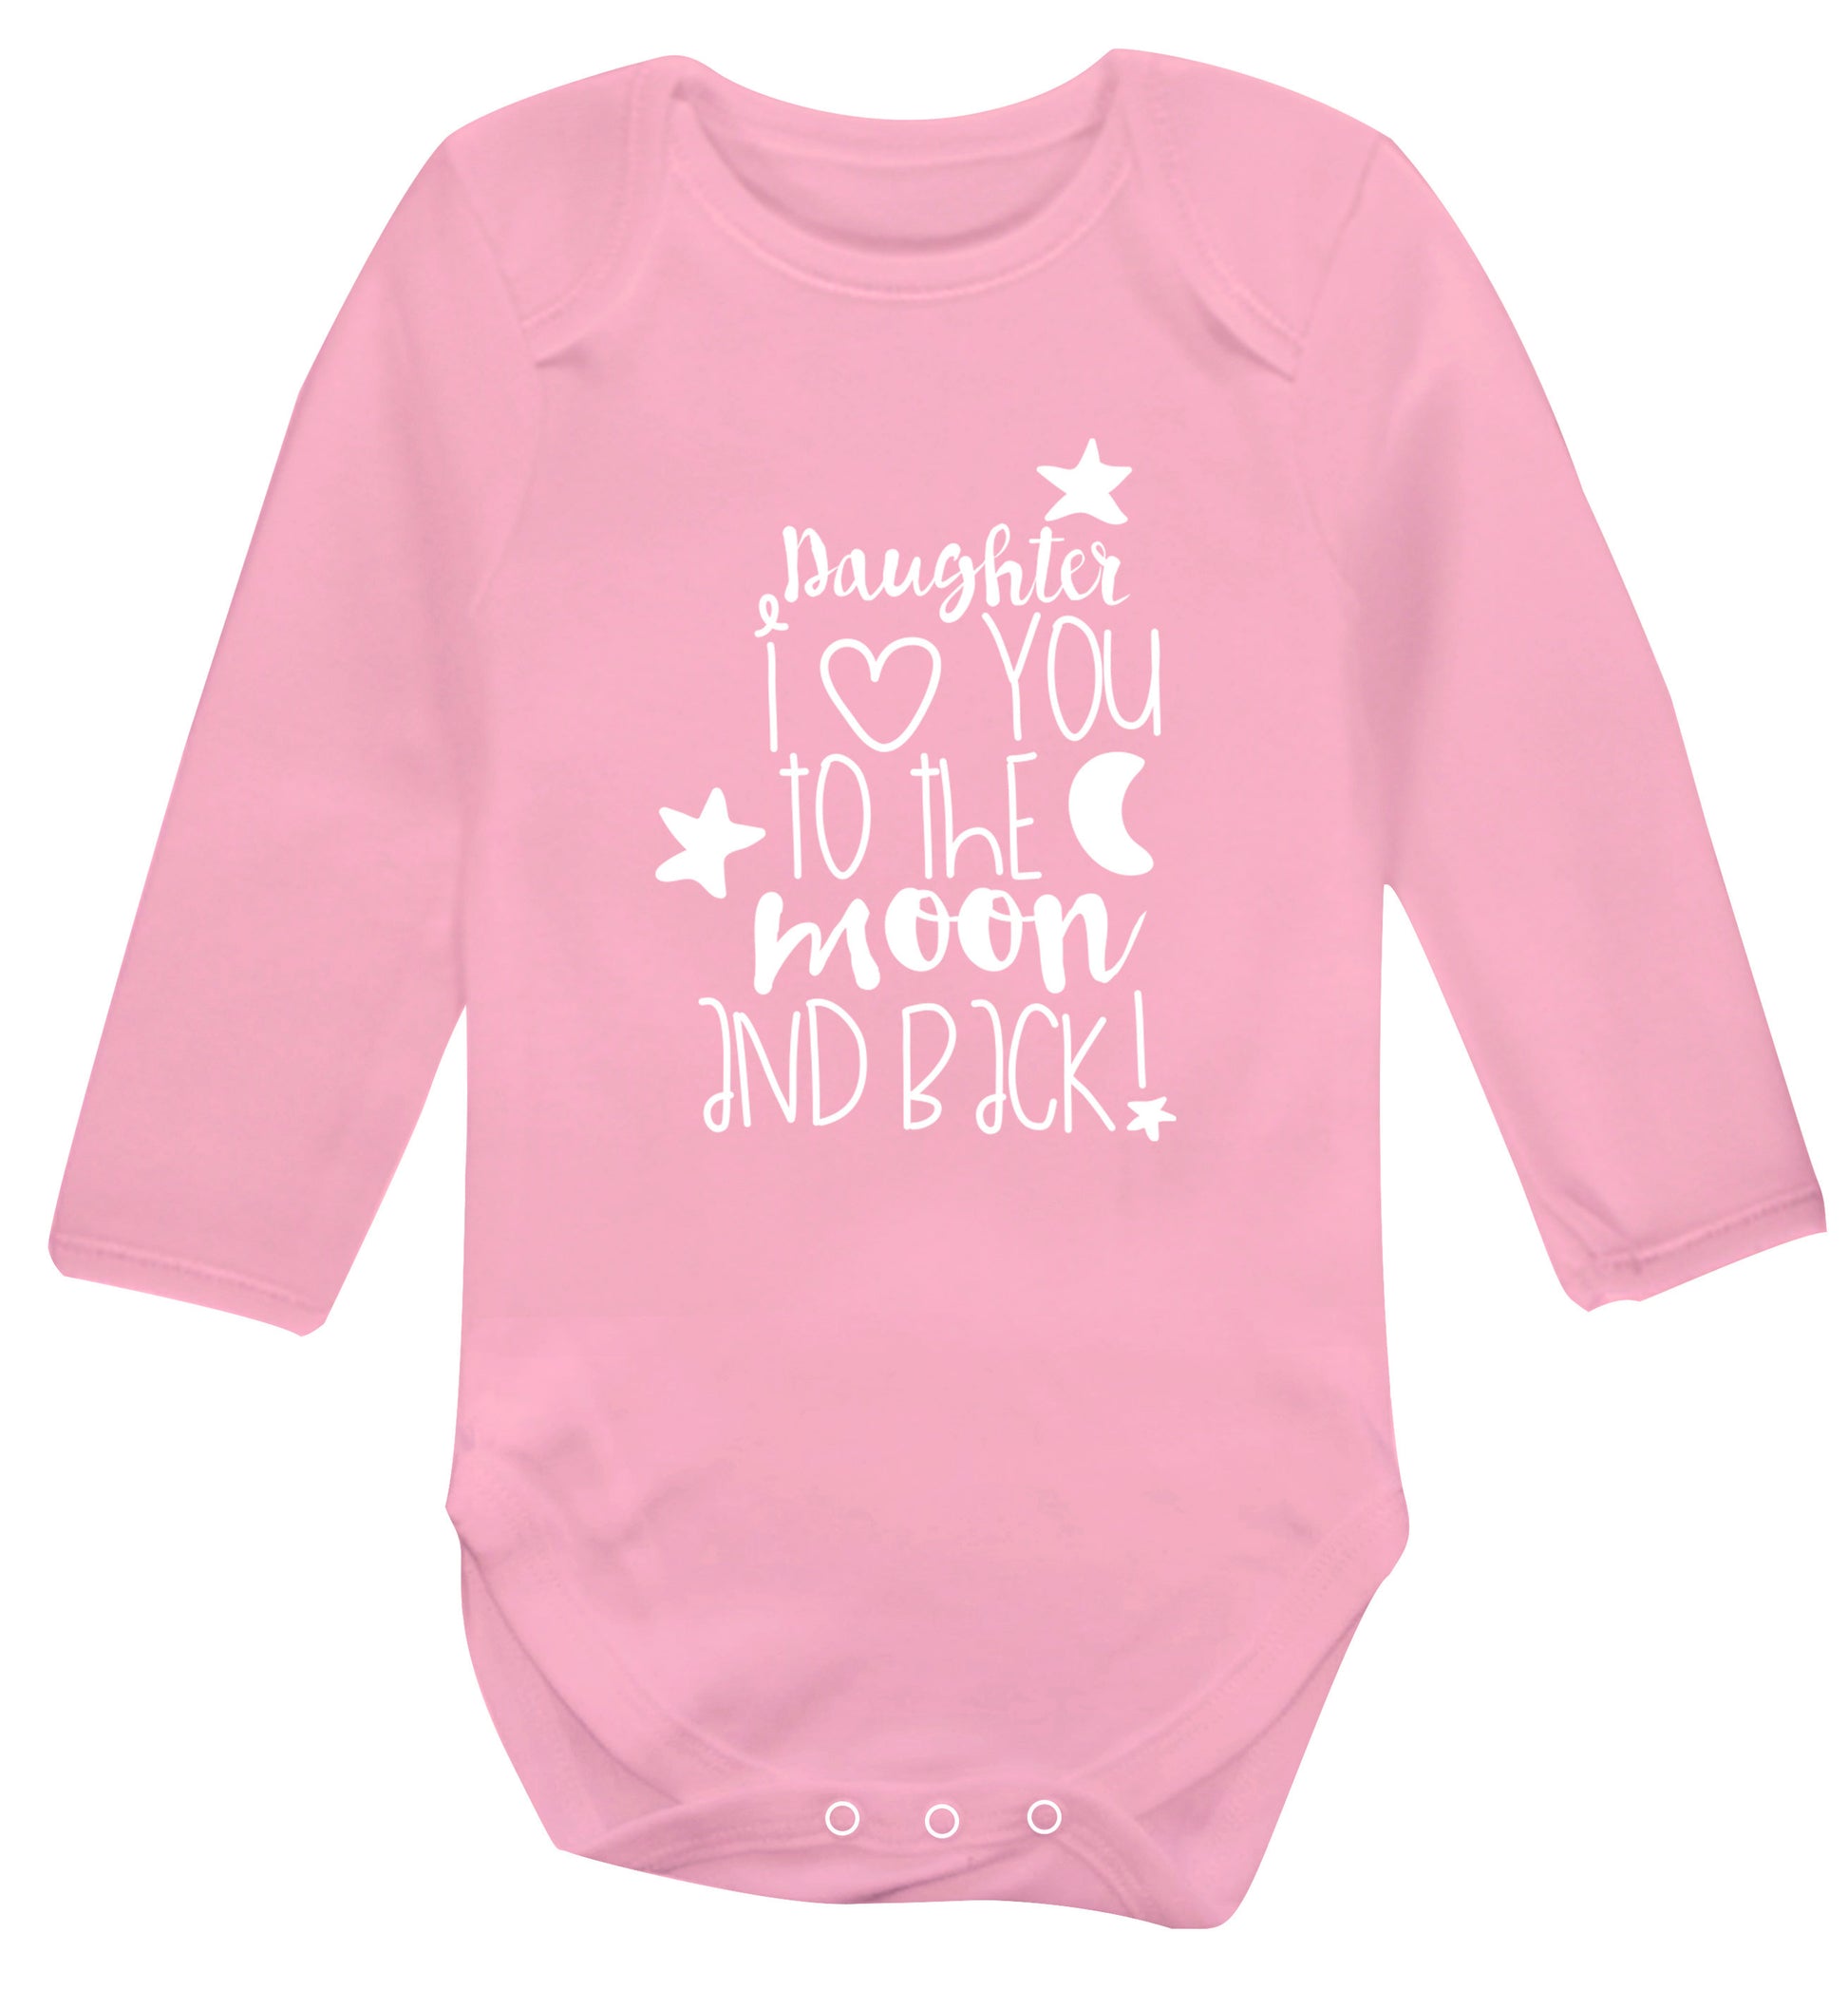 Daughter I love you to the moon and back Baby Vest long sleeved pale pink 6-12 months